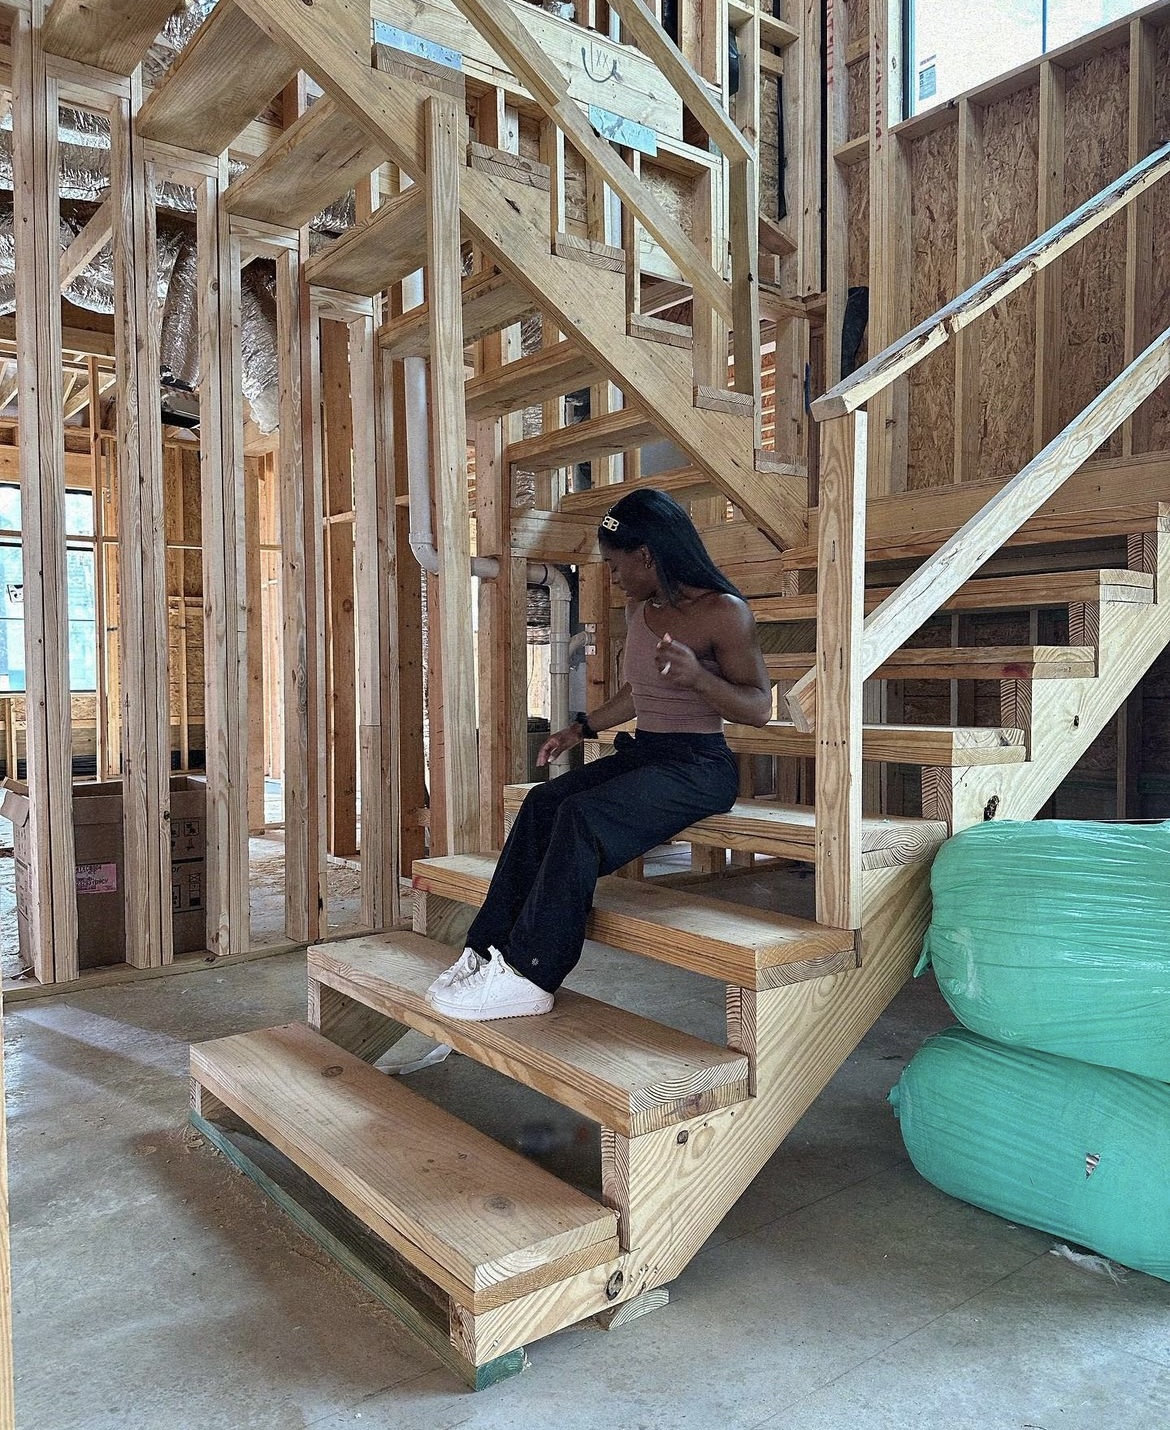 Where does Simone Biles live? Her and her husband are currently finishing up building a mansion in Houston, Texas. Pictured: The unfinished stairs in the couple's home. 